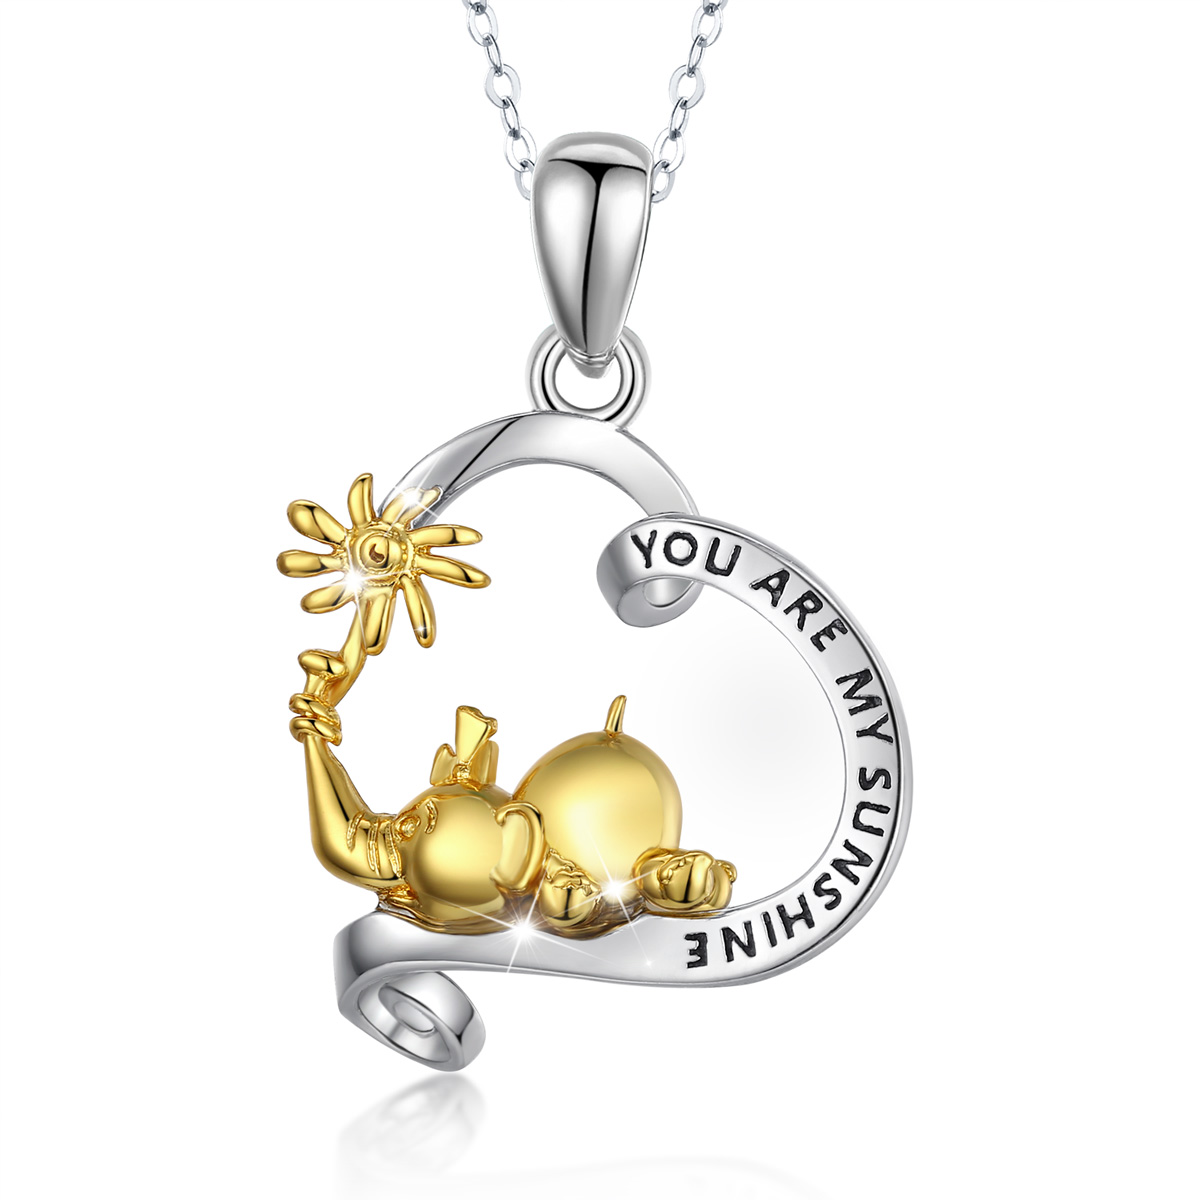 Engraving letters S925 Sterling Silver Elephant Jewelry Gold Plated Good Luck Elephant Trunk Up Necklace With Sunflower